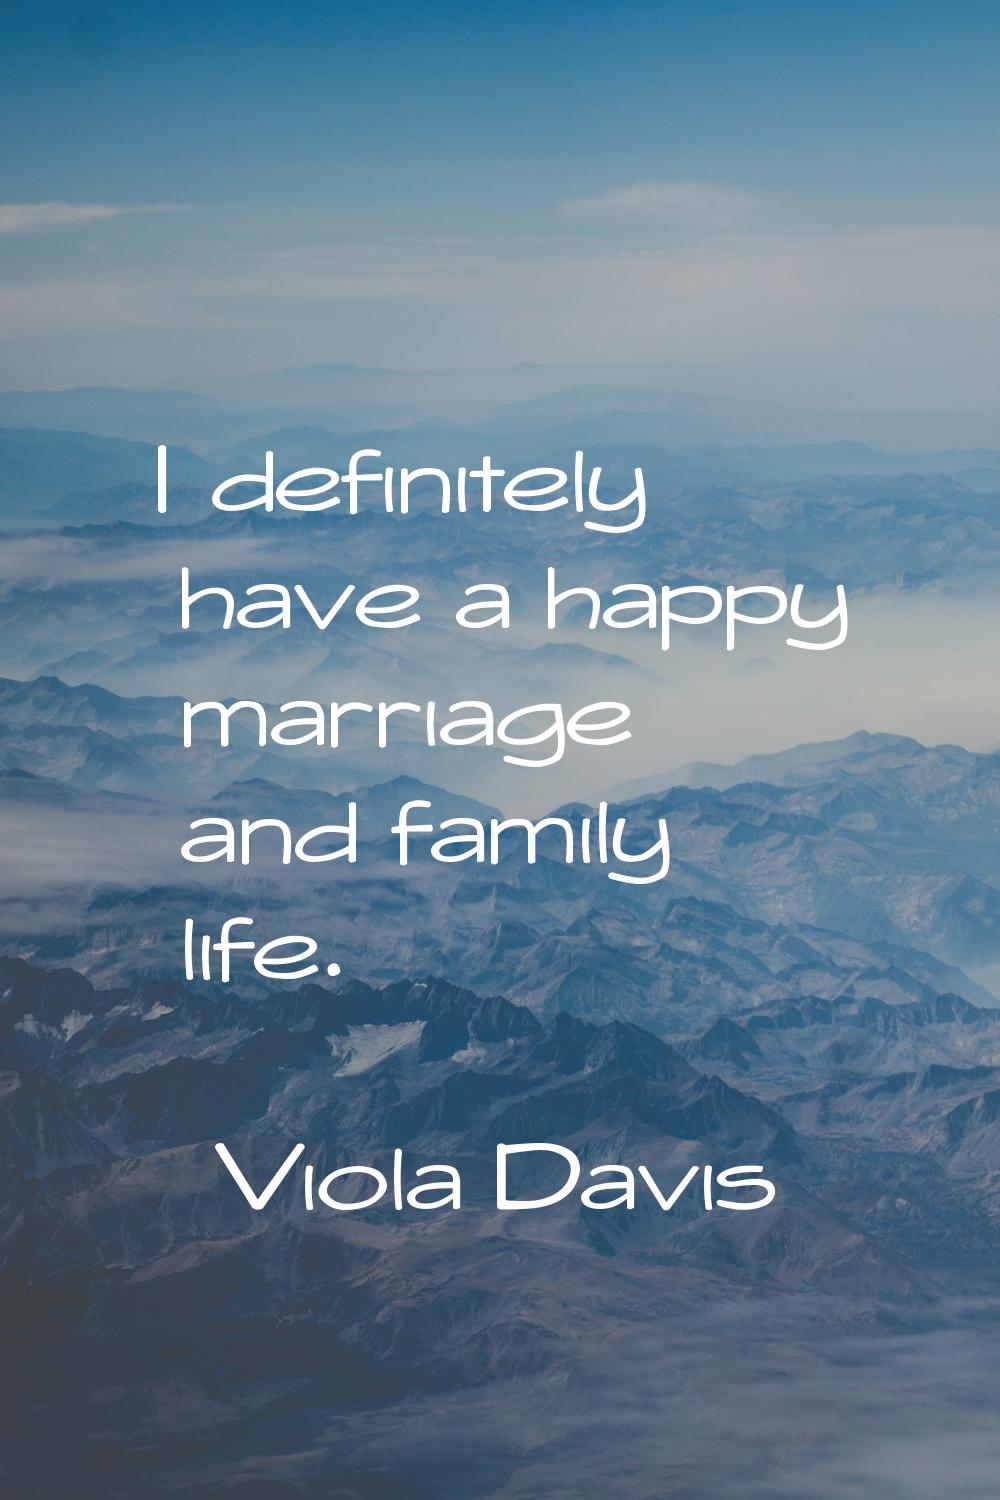 I definitely have a happy marriage and family life.